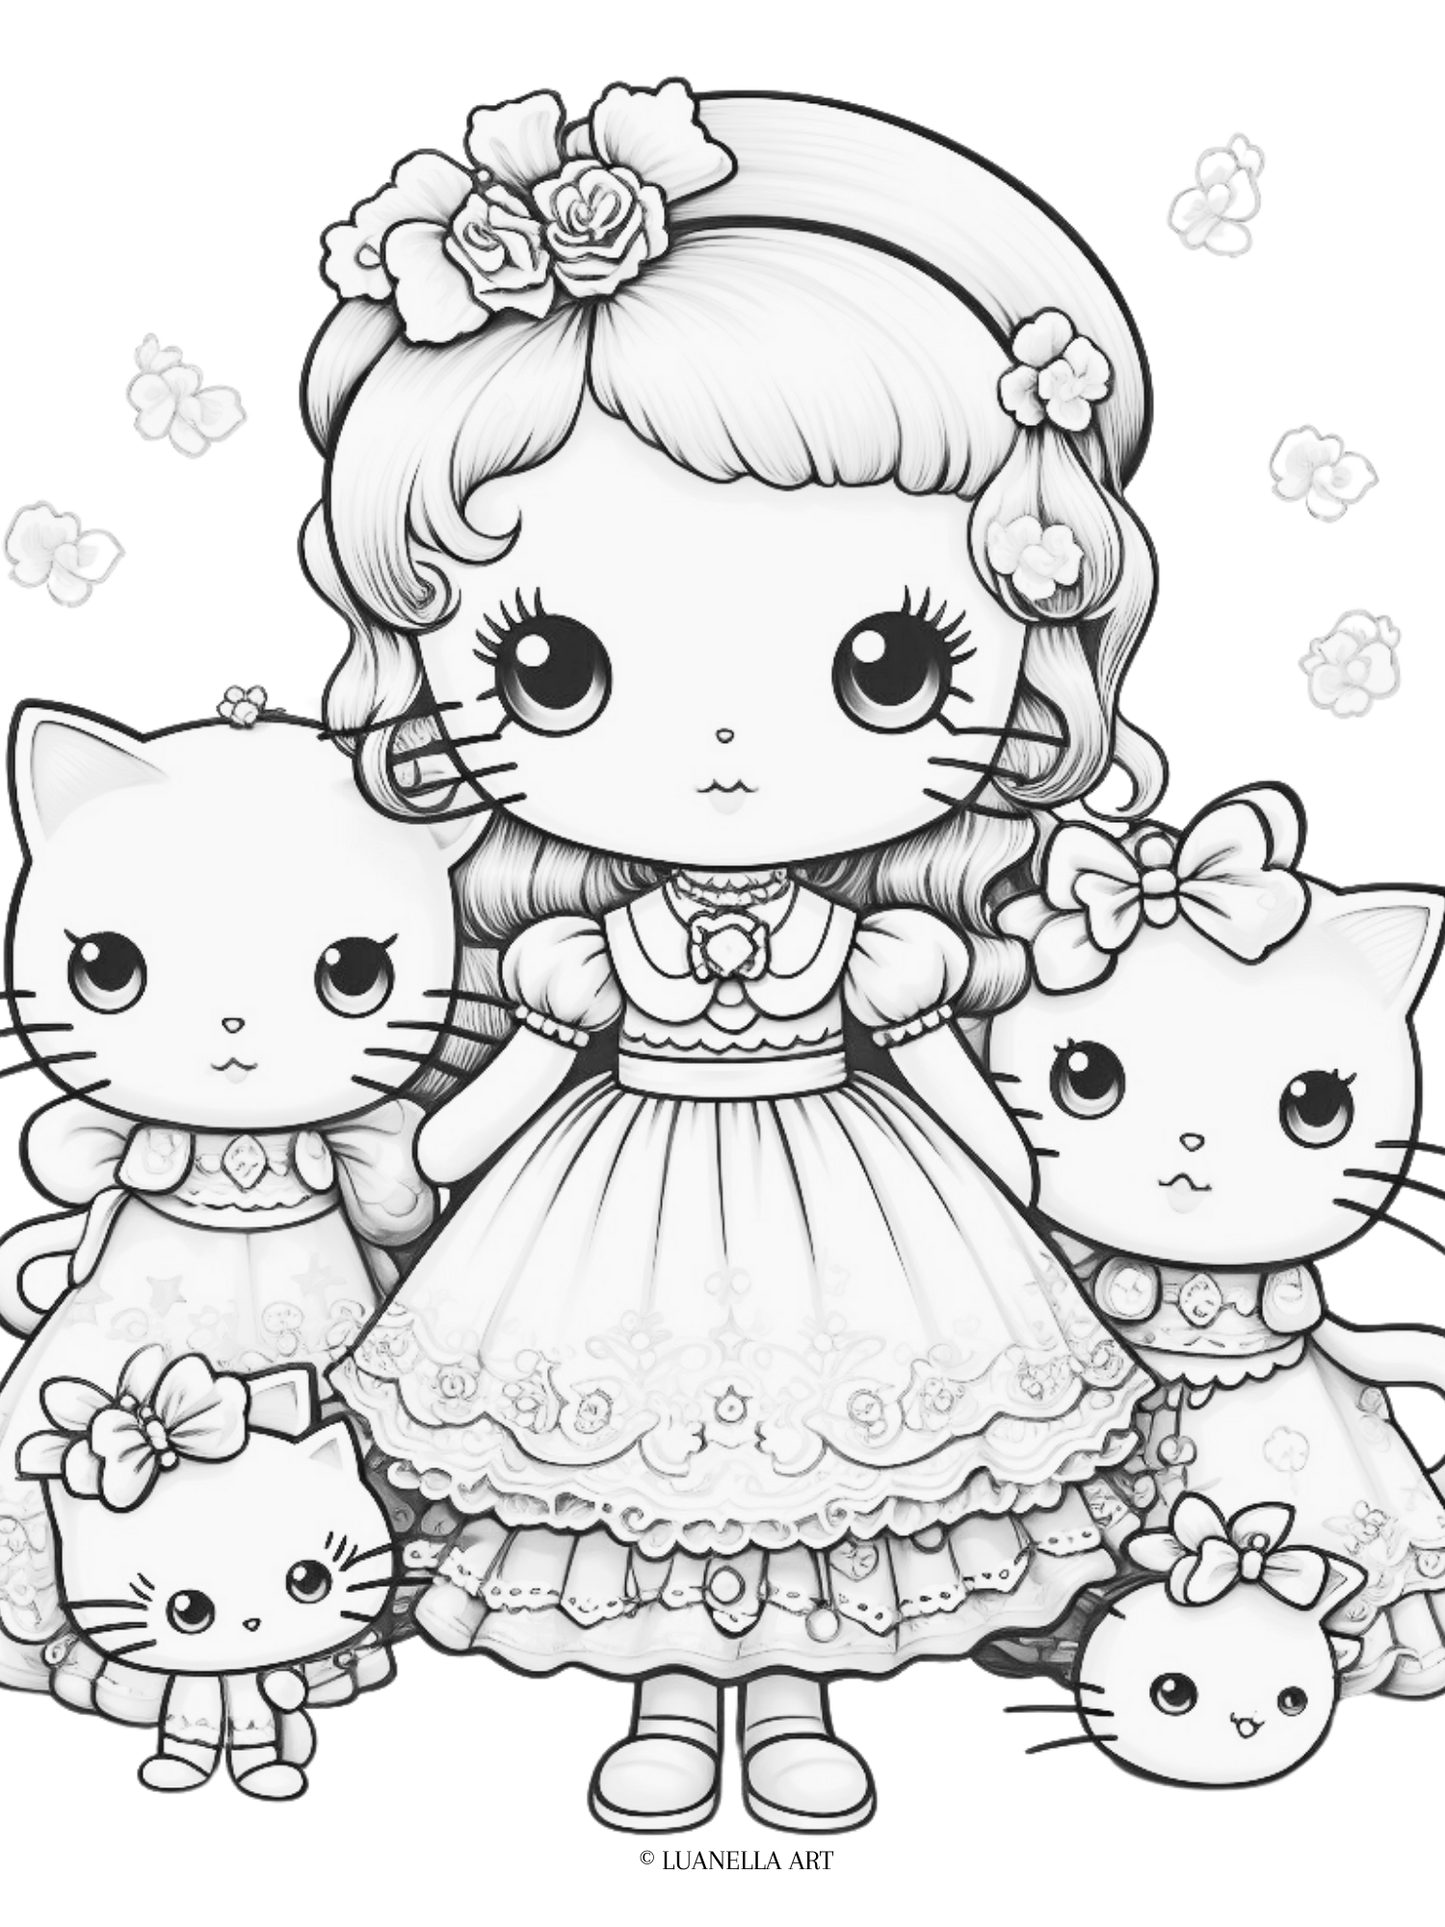 Sanrio family coloring page  | Instant Digital Download